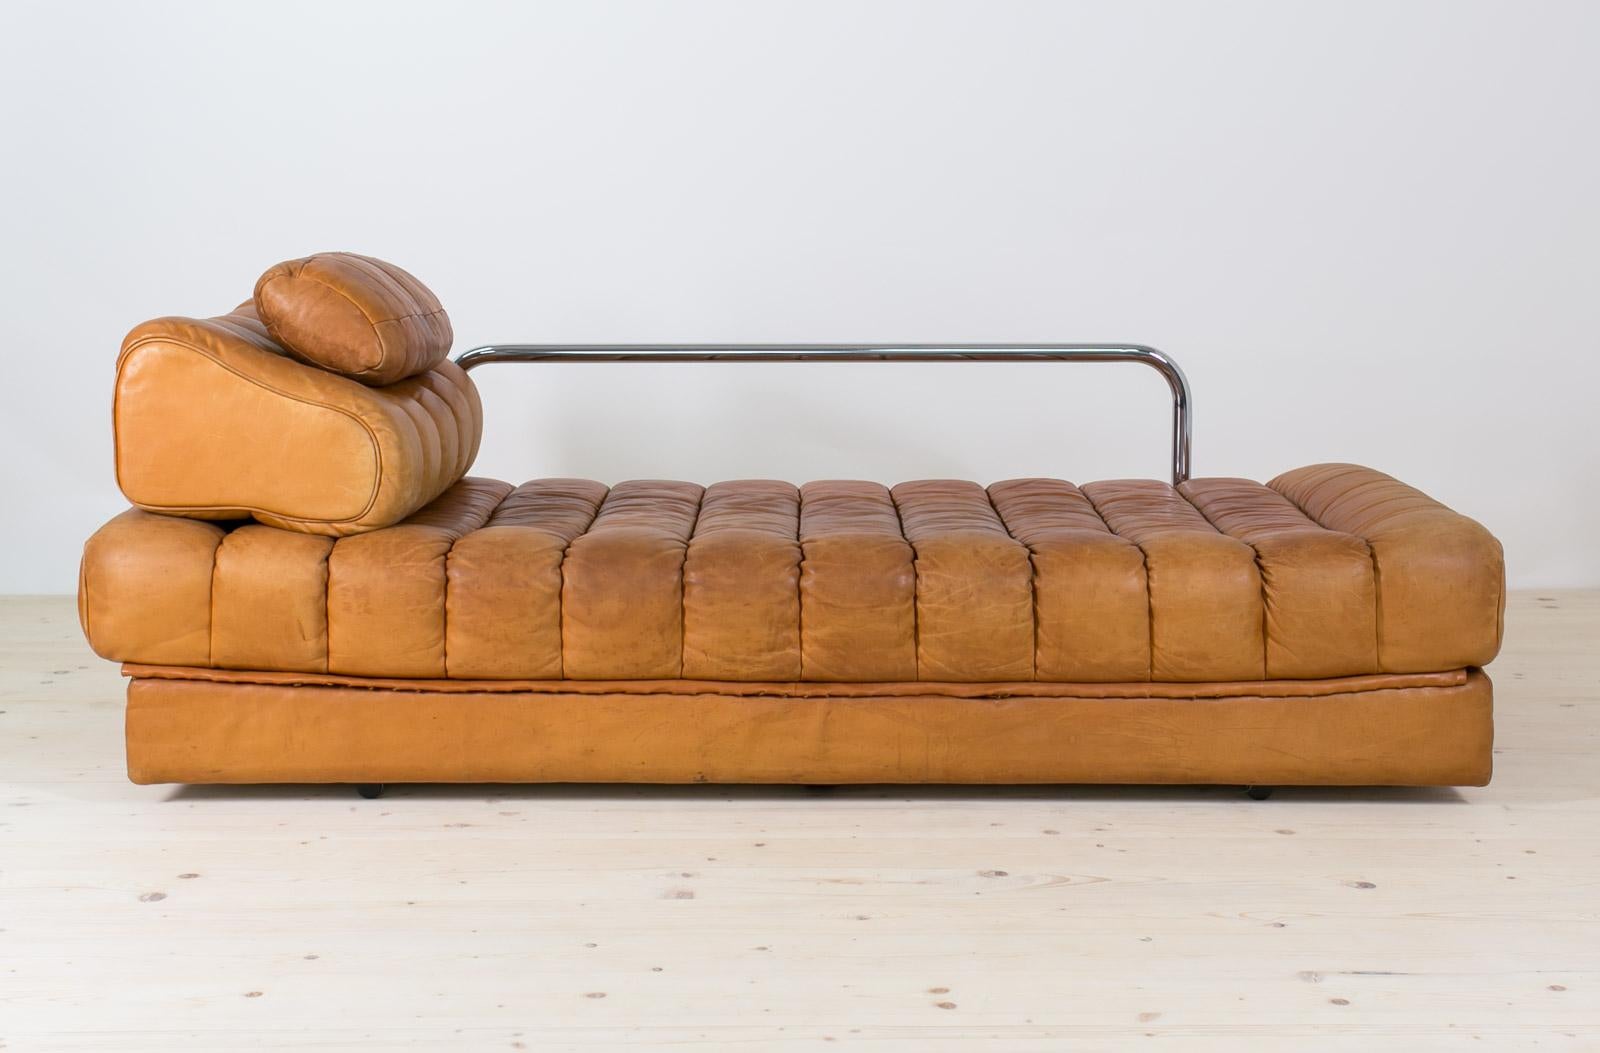 Vintage Swiss De Sede Sofa Bed from the 1960s, model DS 85 8